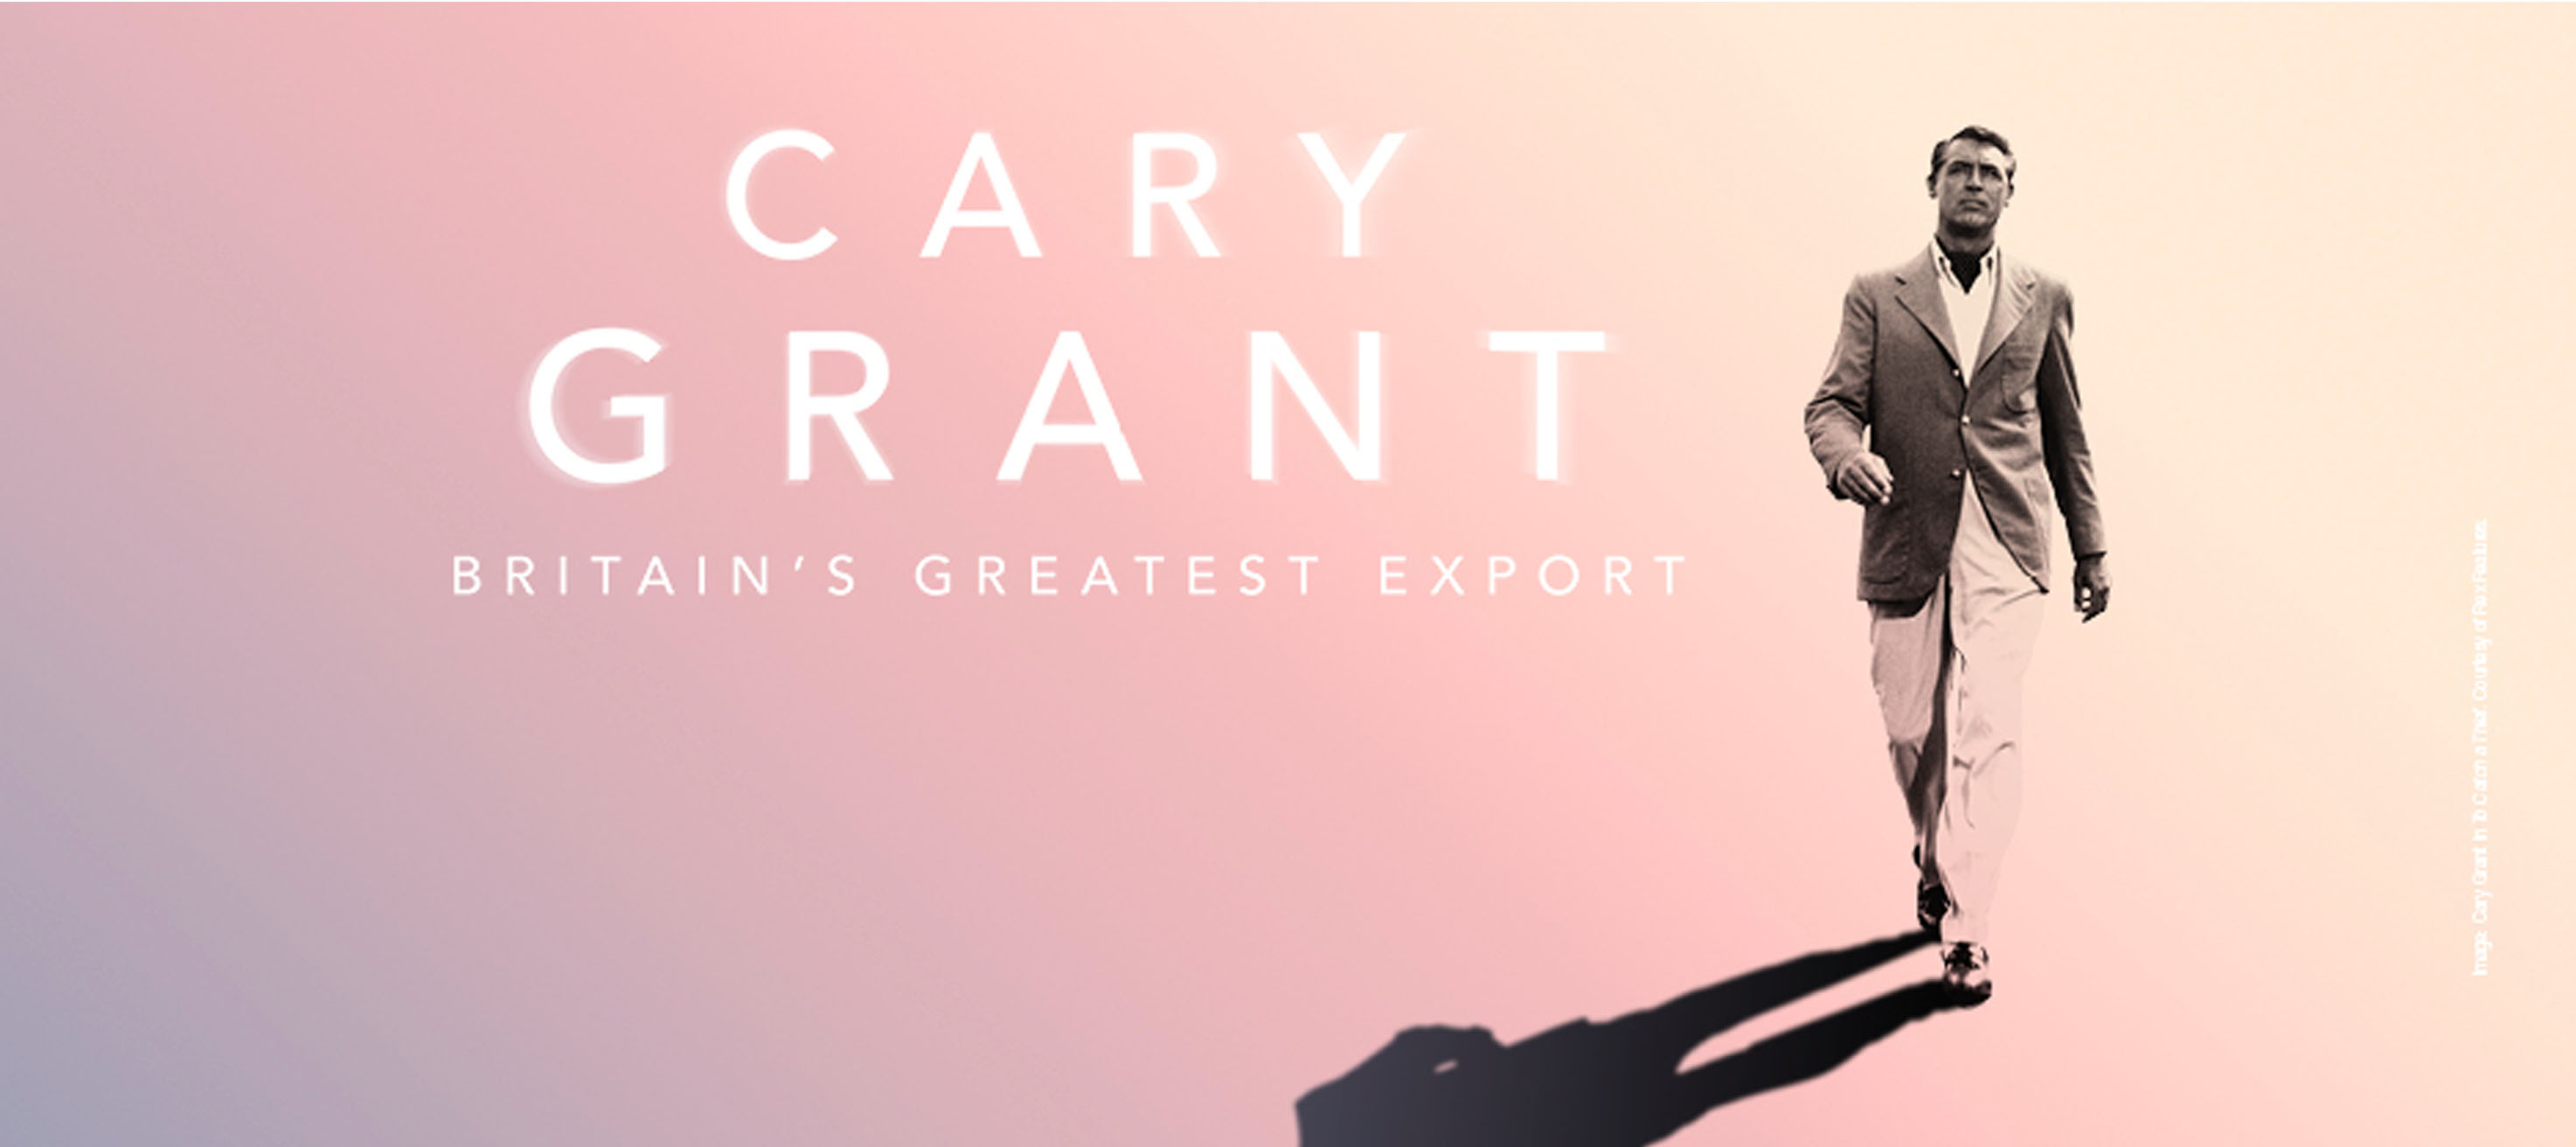 Cary Grant: Britain's Greatest Export